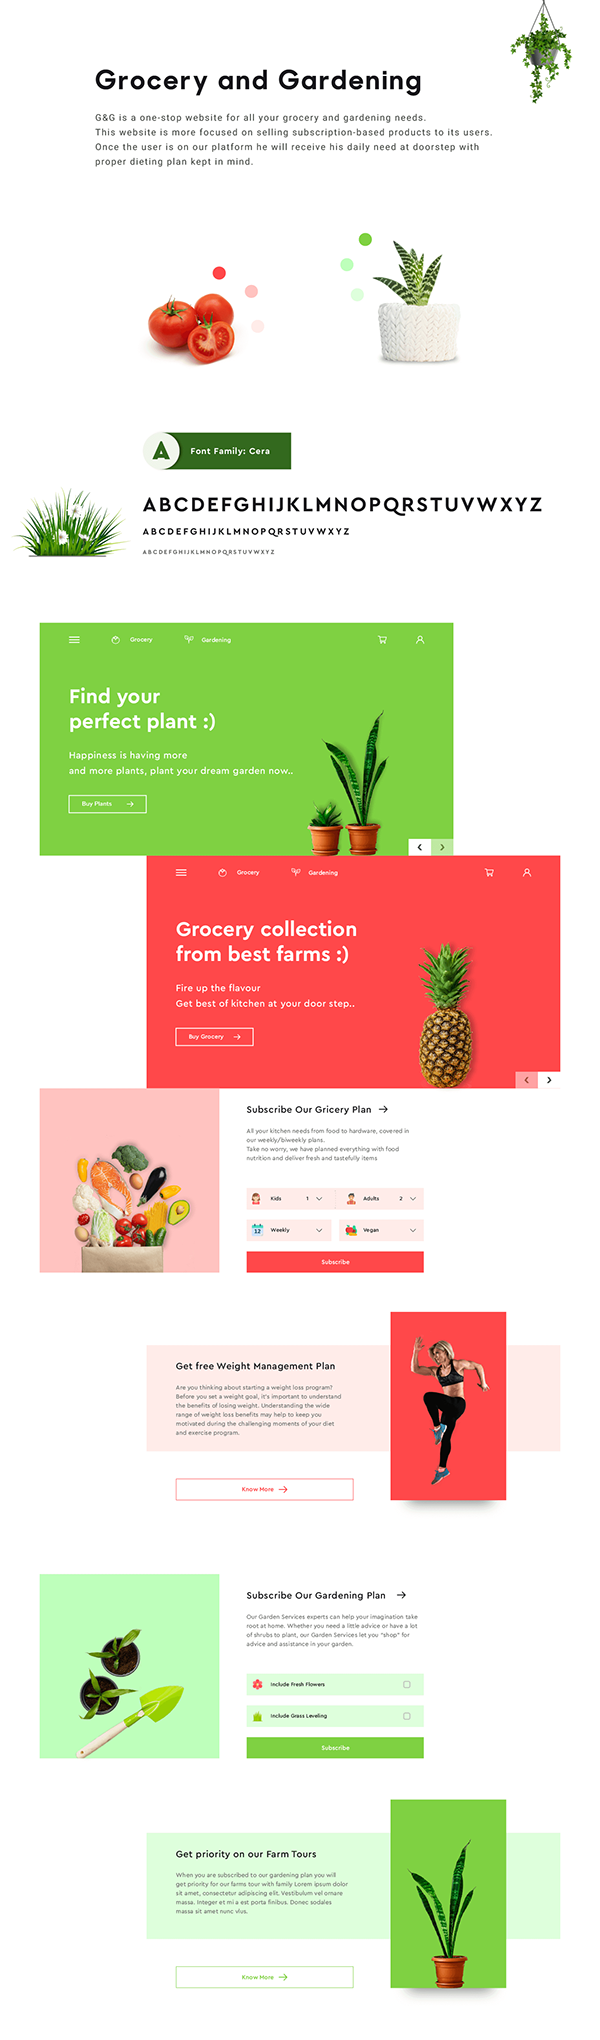 Grocery and Gardening ecommerce Website